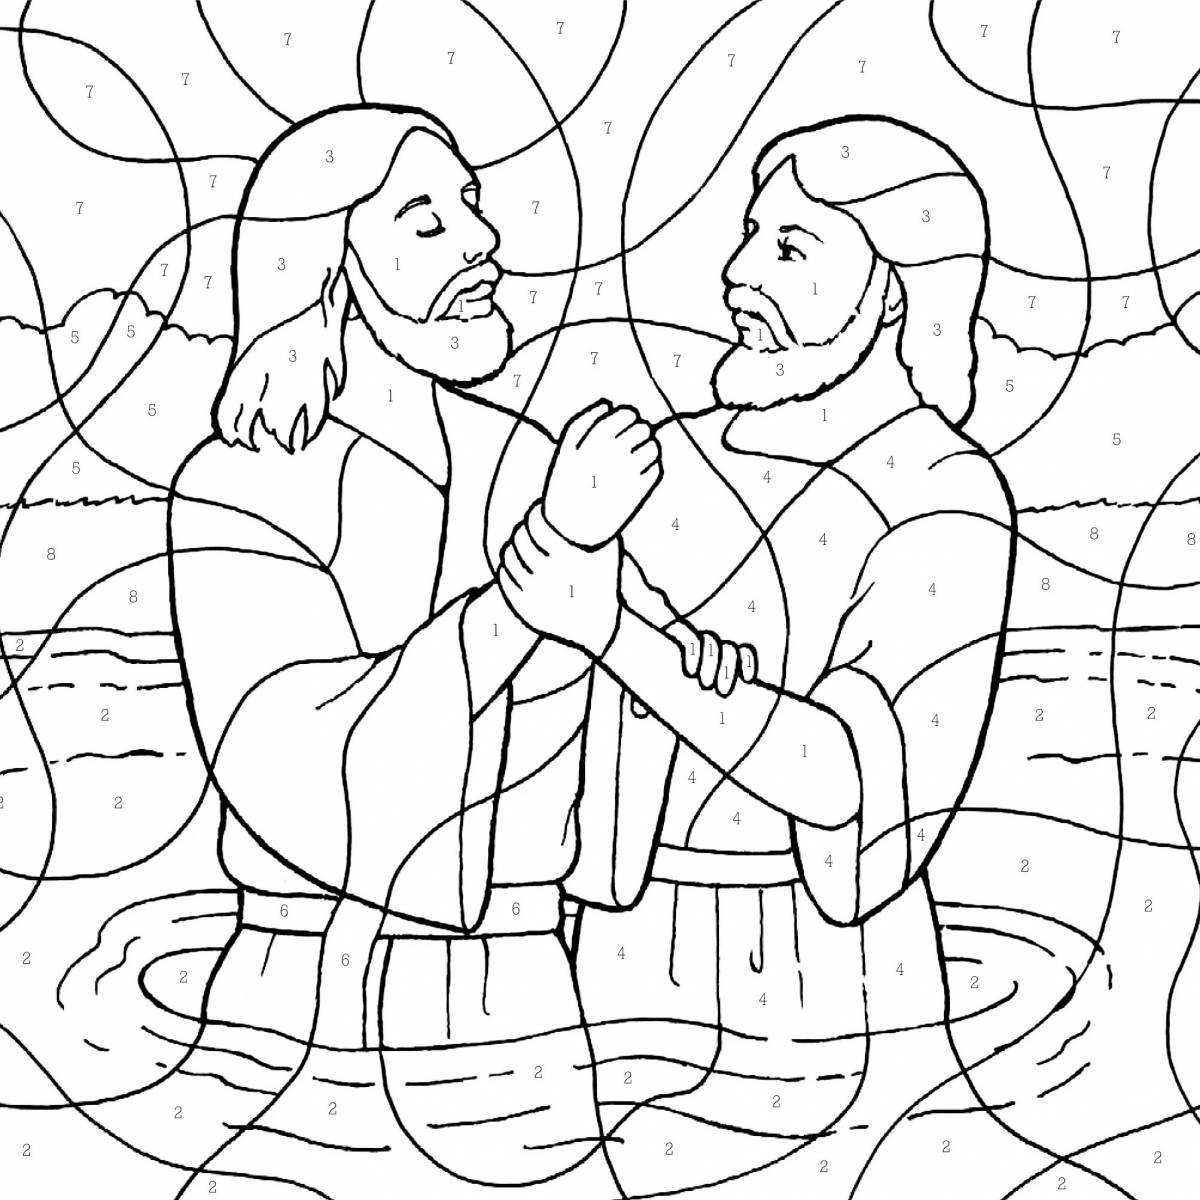 Majestic baptism coloring page